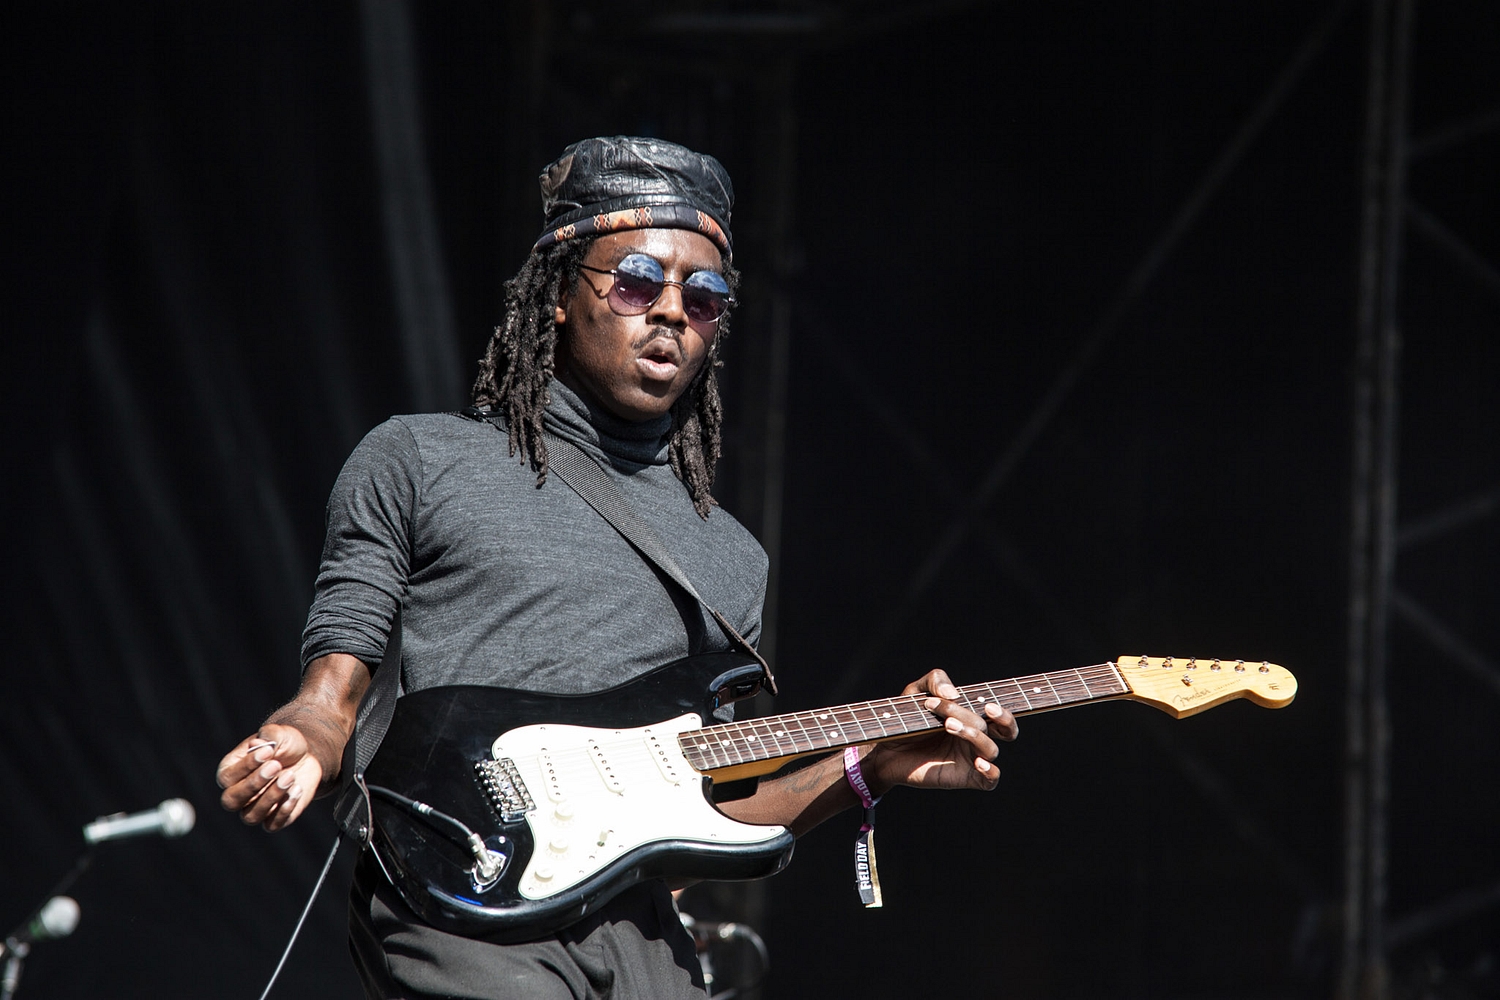 Blood Orange covered Neil Young’s ‘Heart Of Gold’ at Coachella